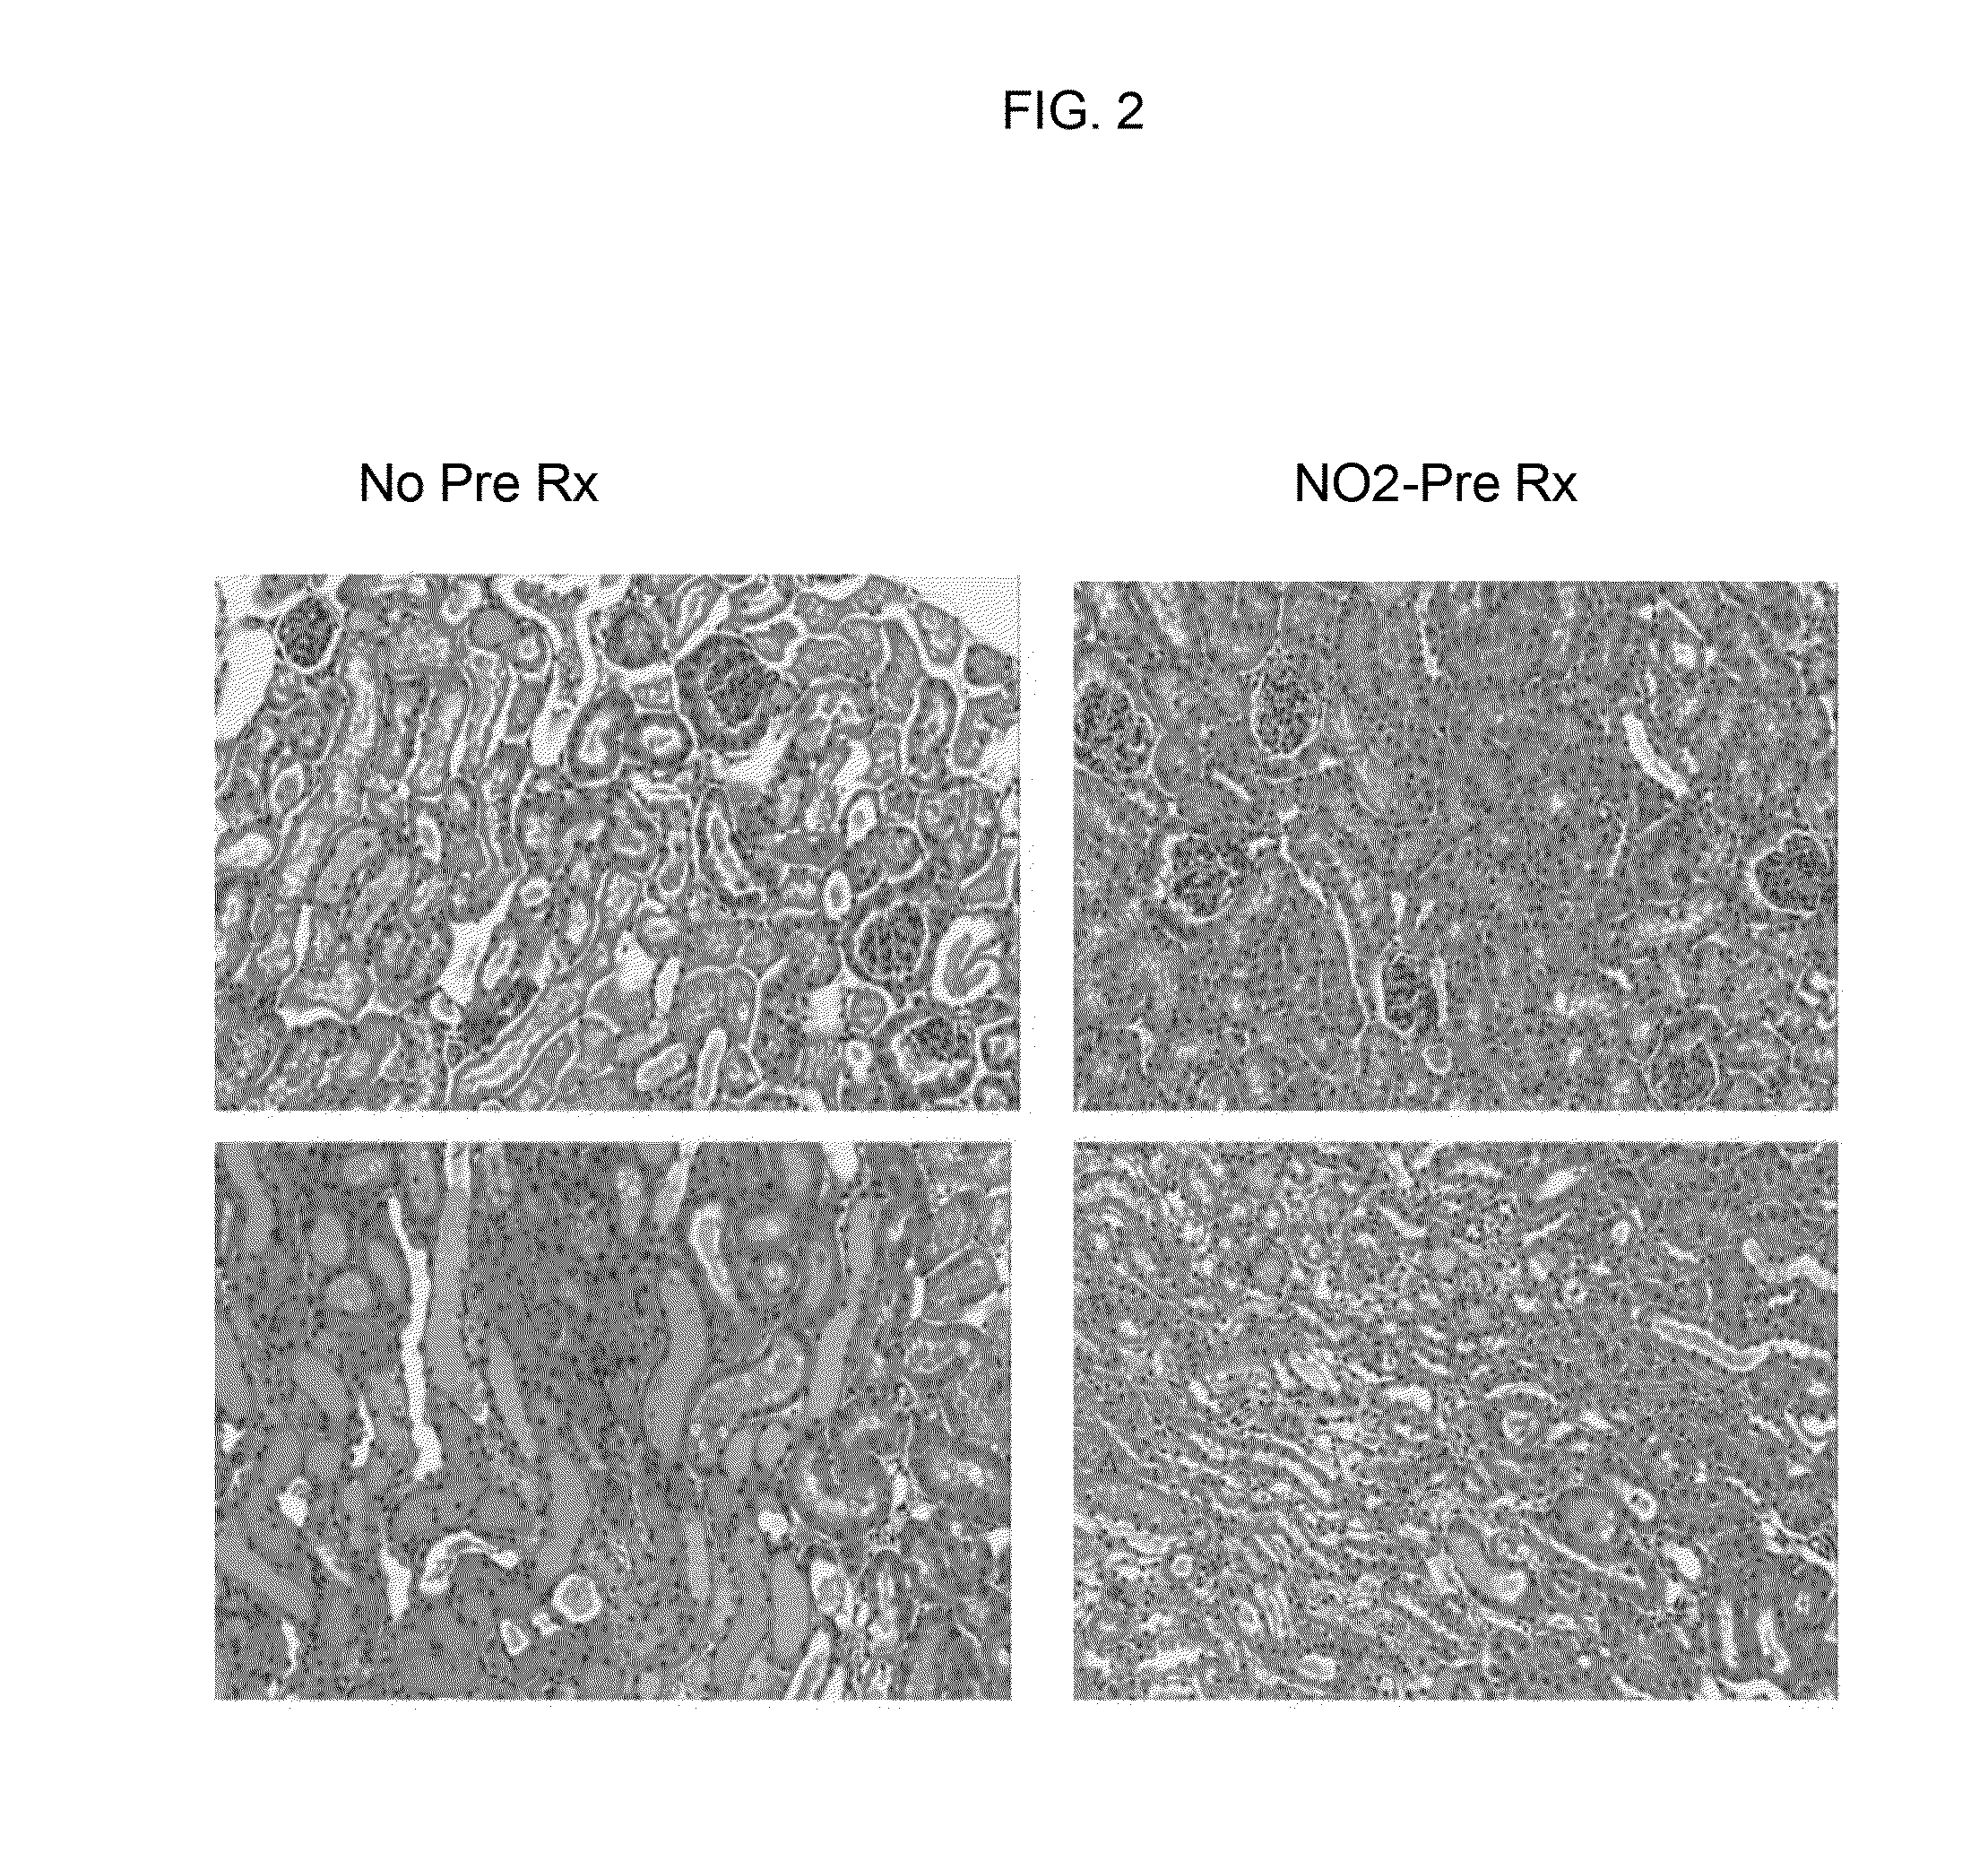 Compositions, kits, and methods to induce acquired cytoresistance
using stress protein inducers